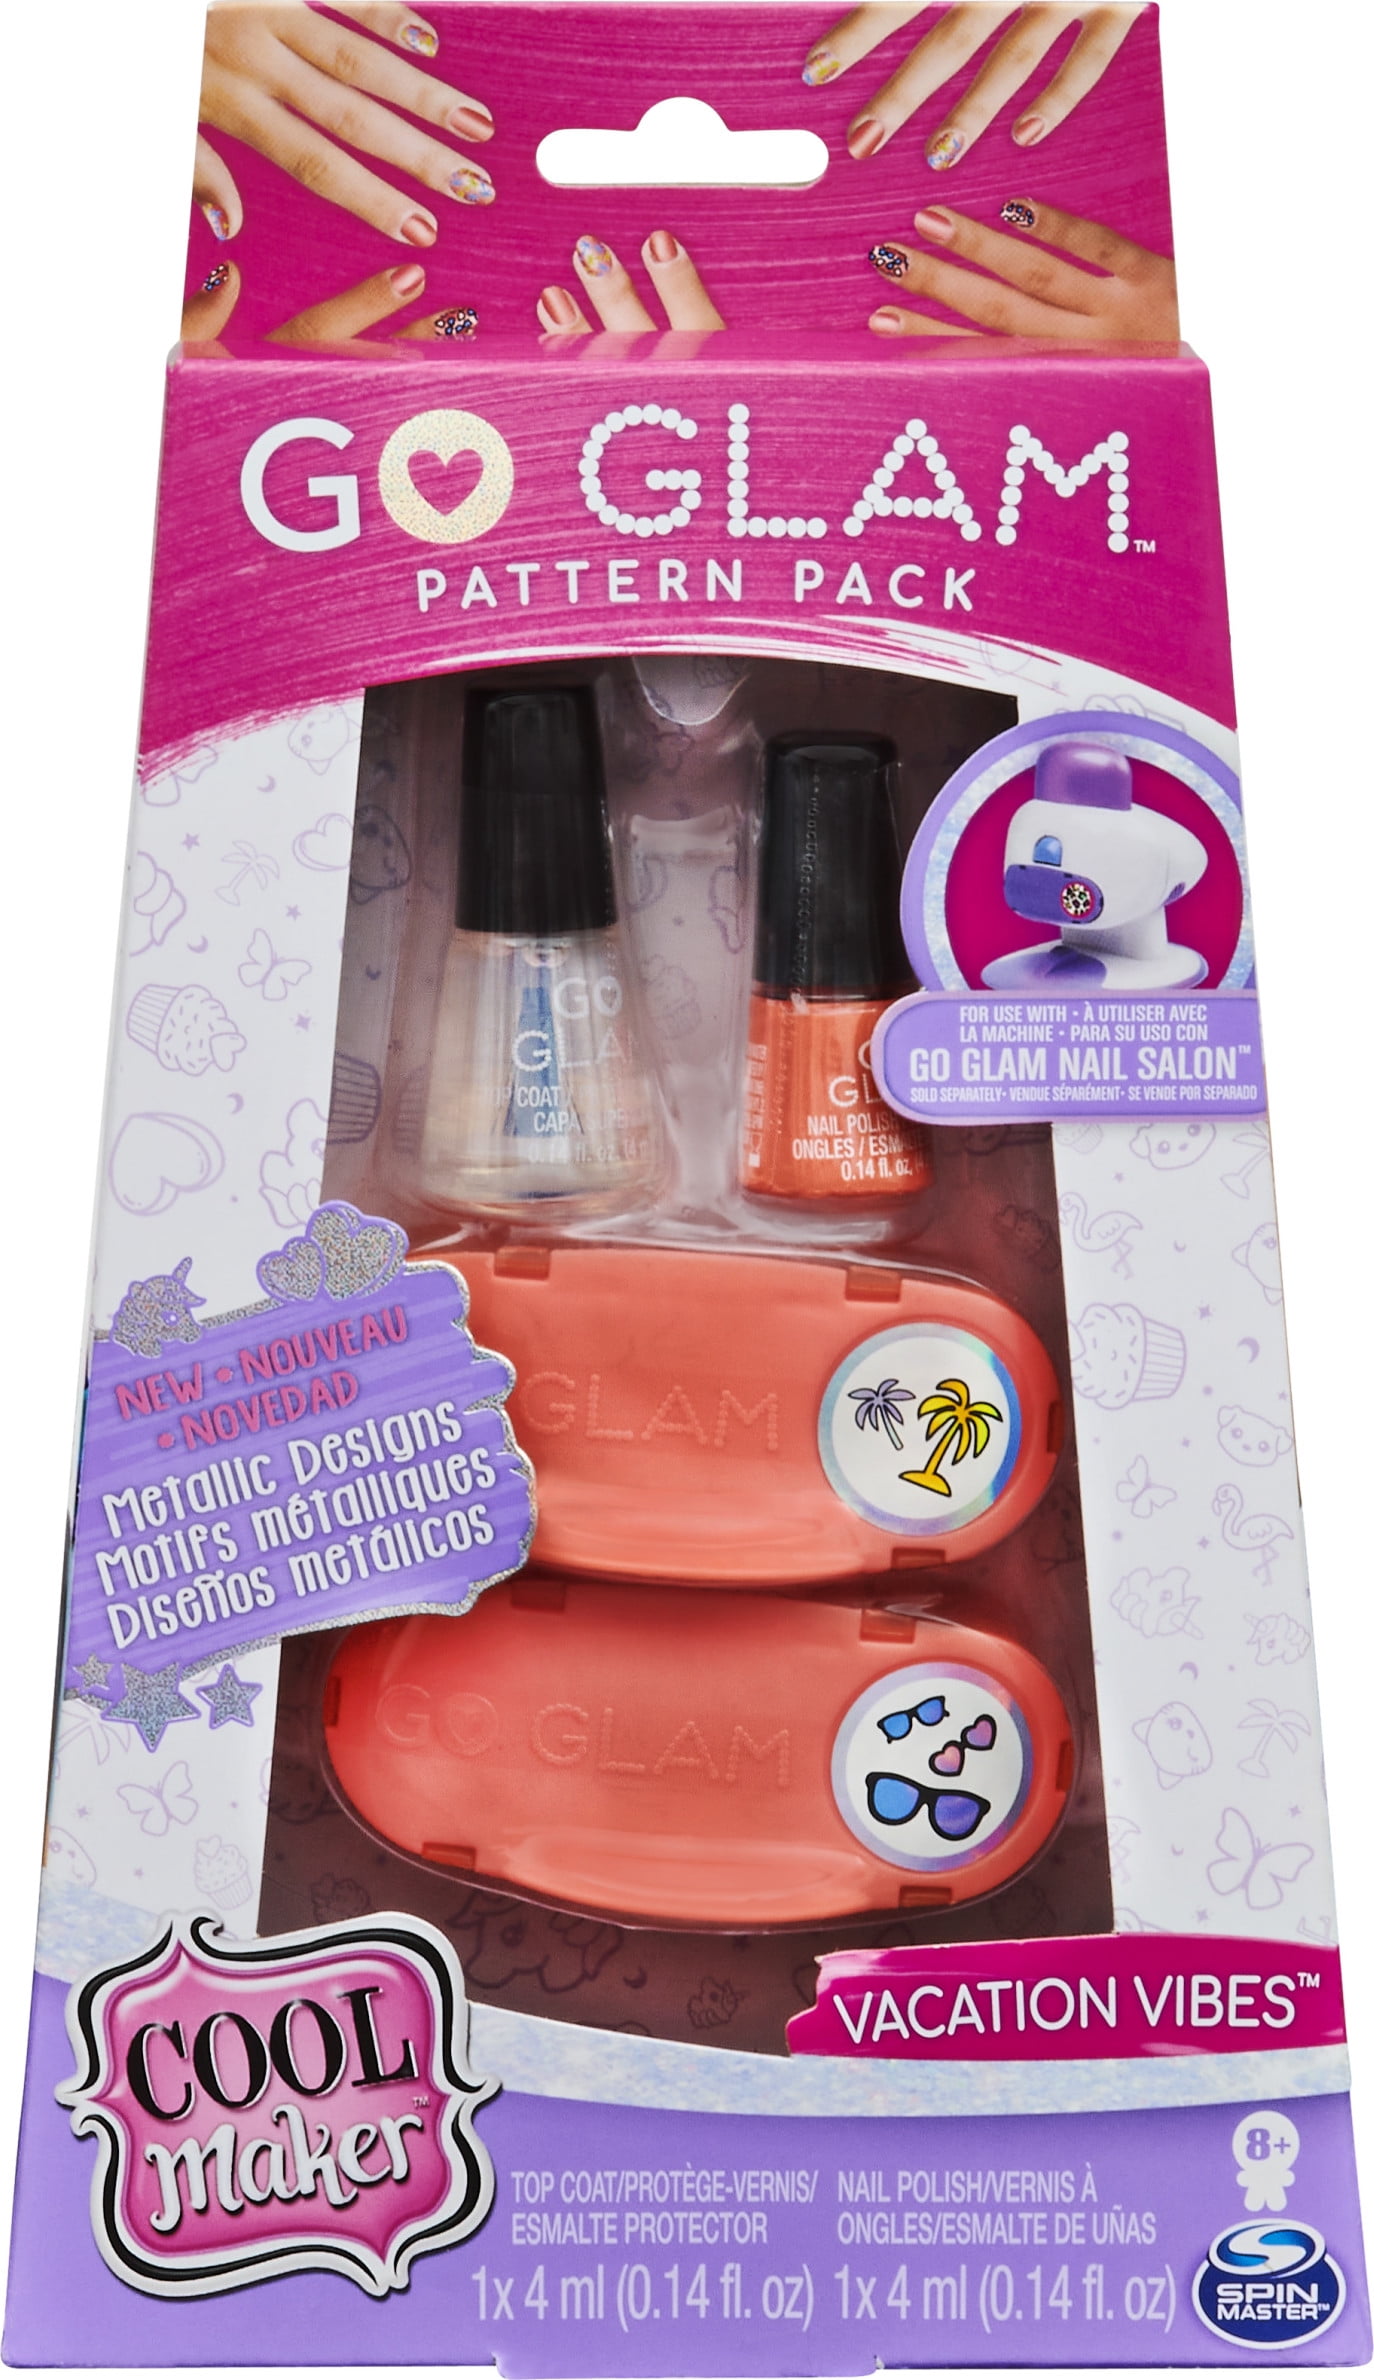 Cool Maker Go Glam Pattern Pack Refill -DAYDREAM